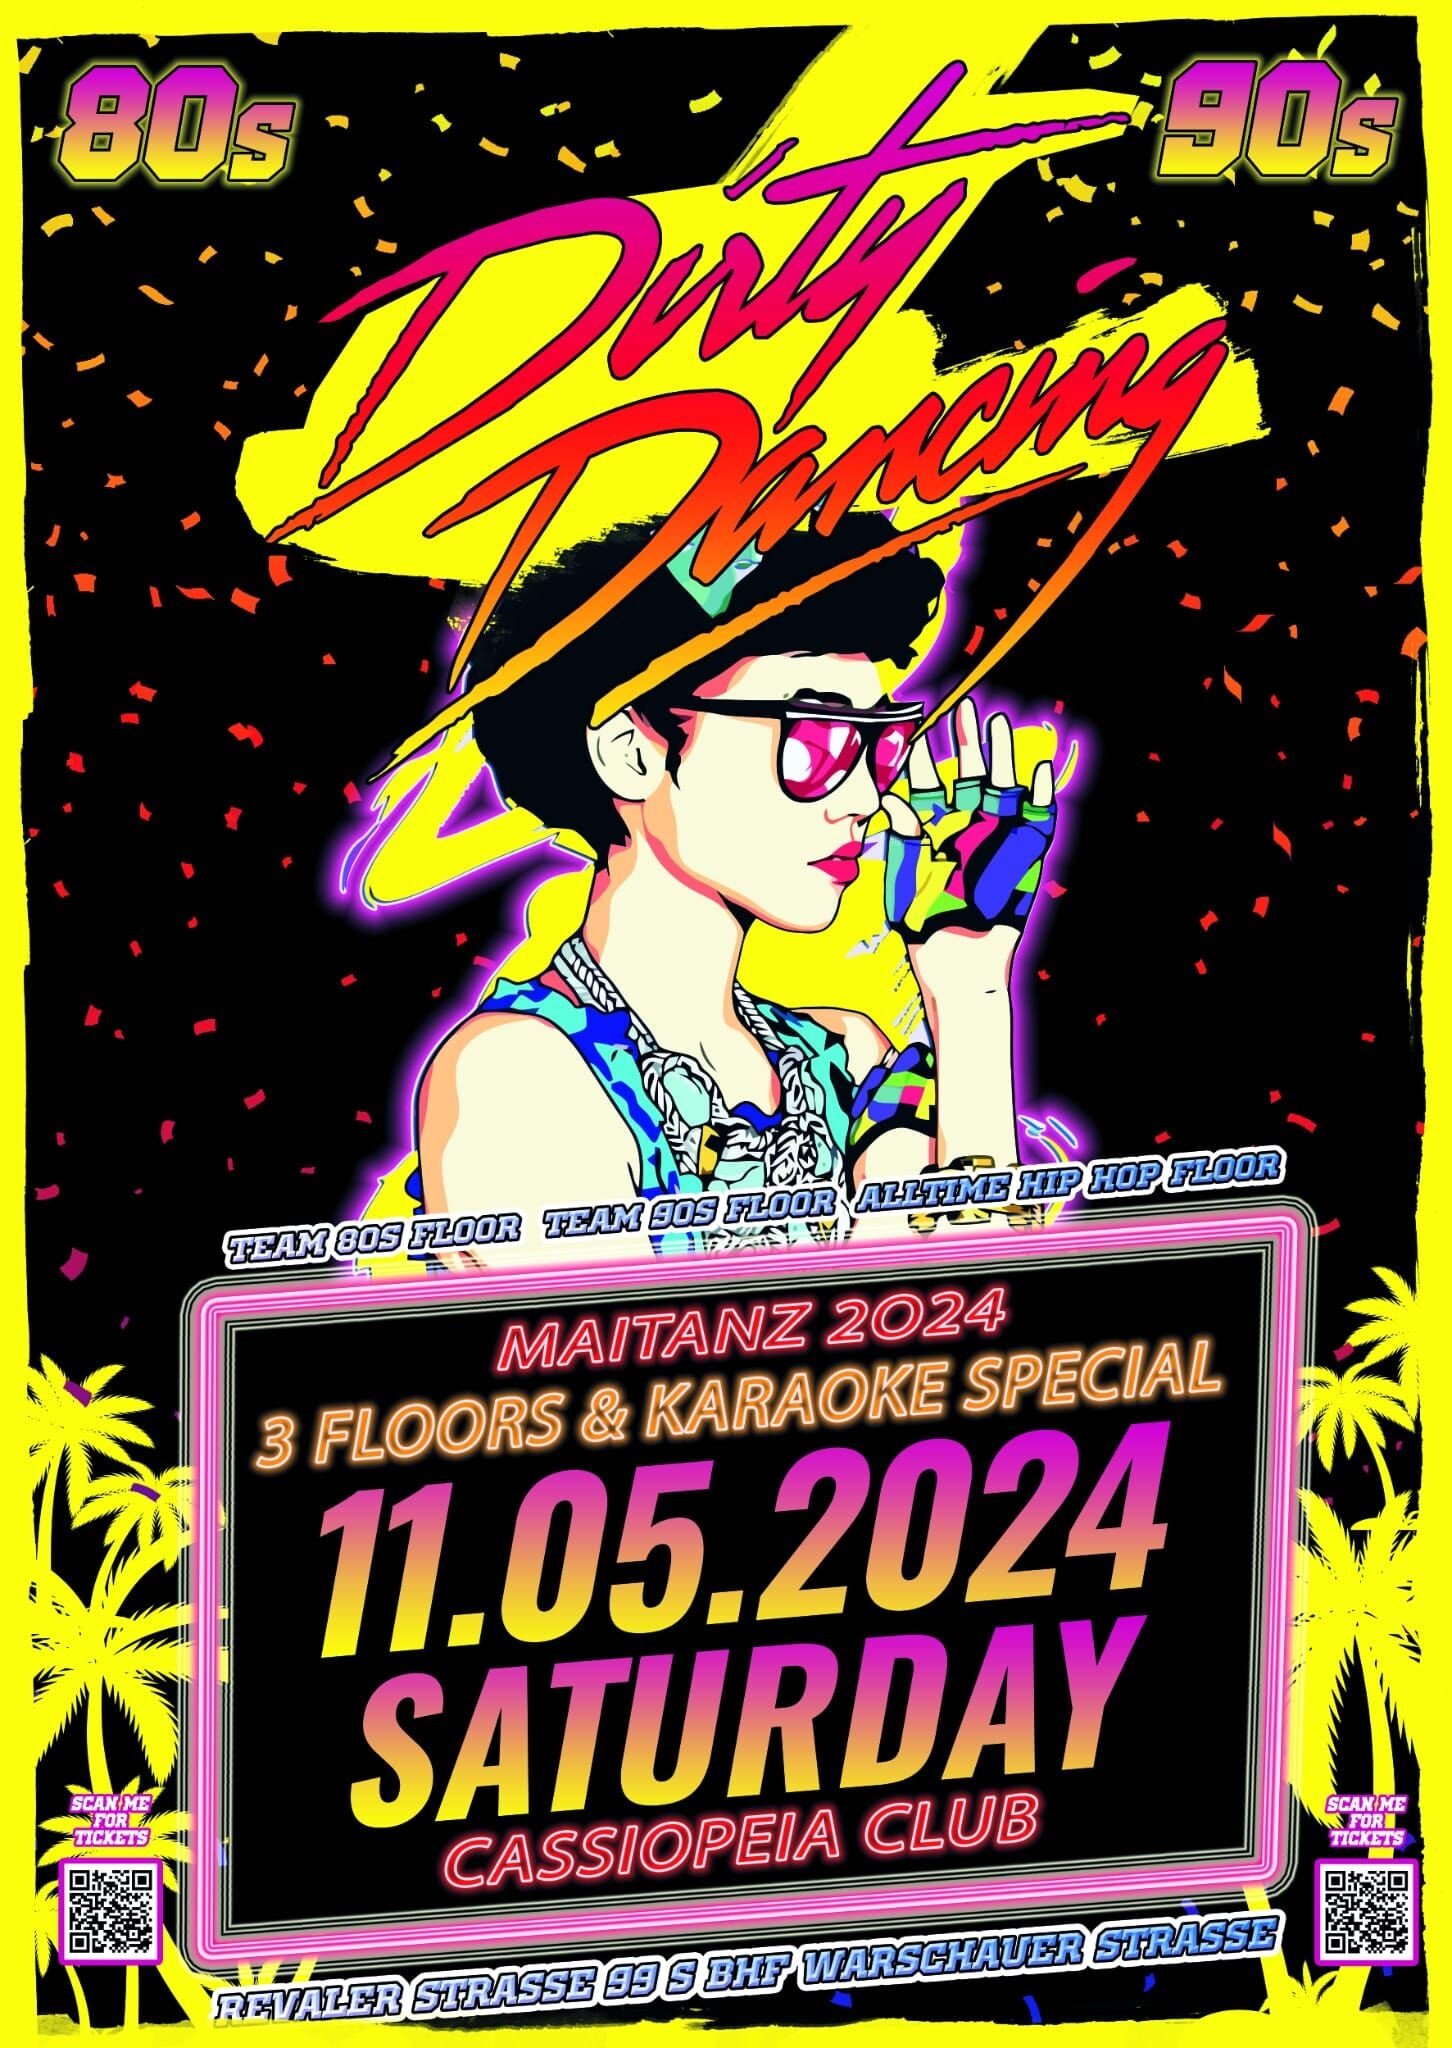 Cassiopeia 11.05.2024 Dirty Dancing Party - 80s & 90s Love - 3 Floors, Karaoke & Outdoor